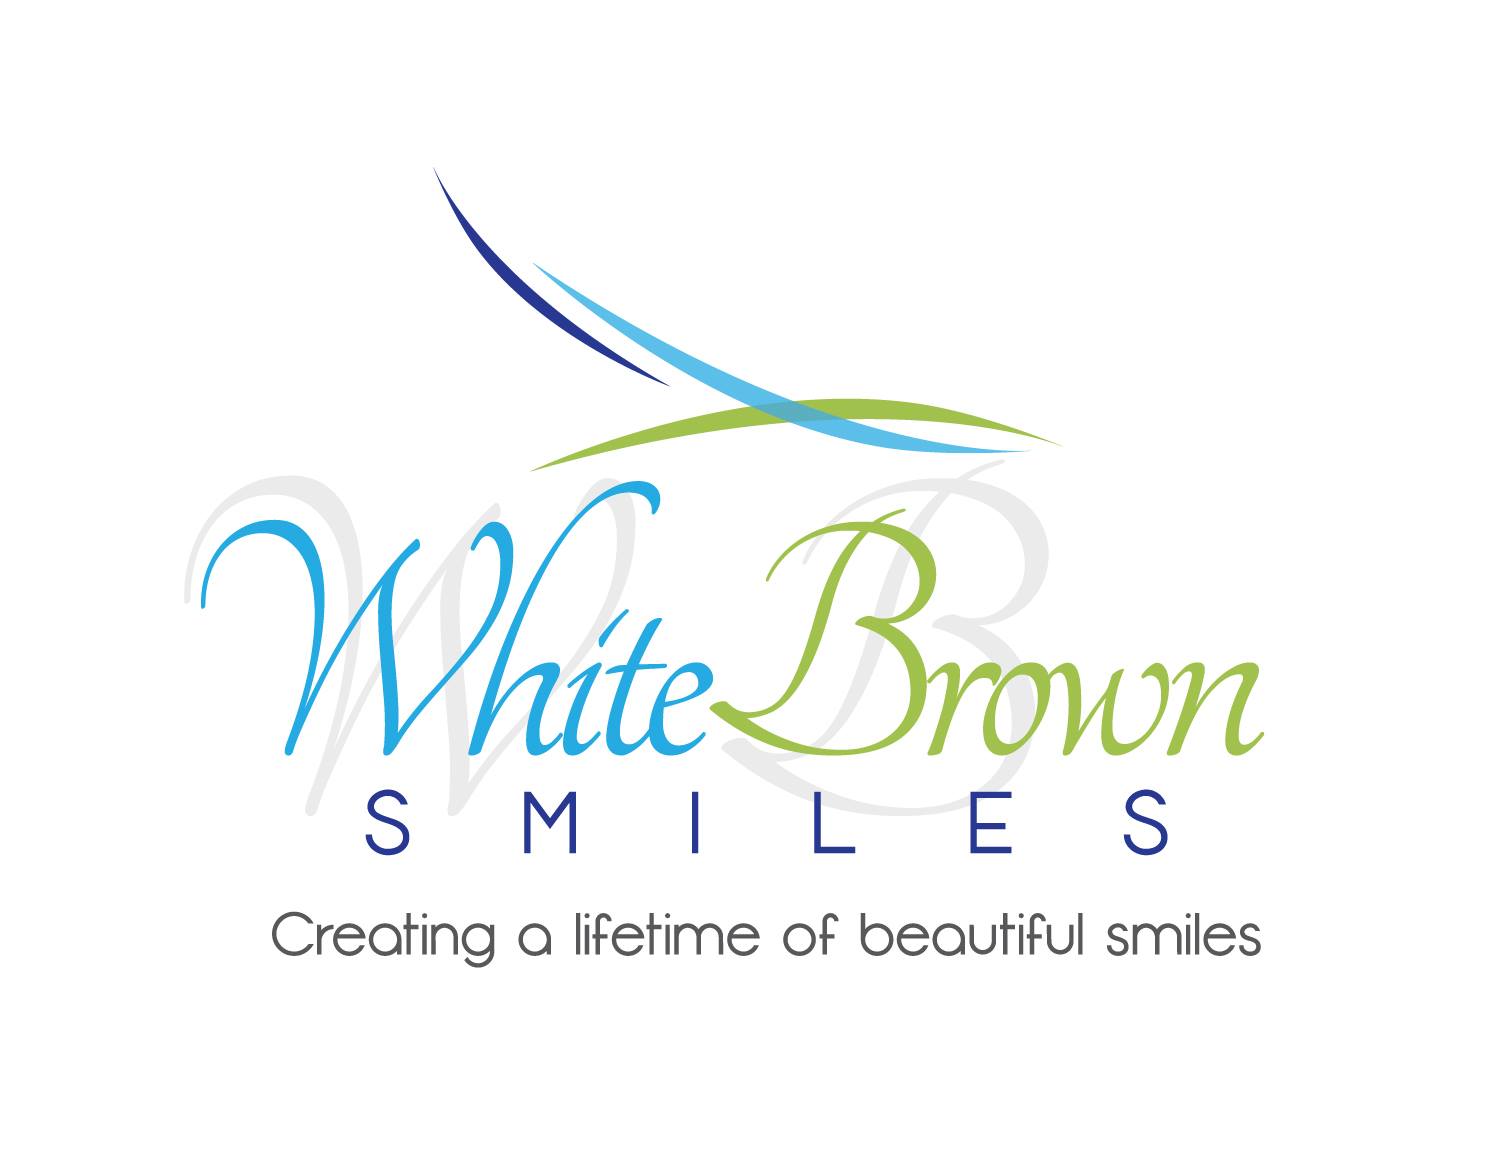 Business logo of White Brown Kerry DDS